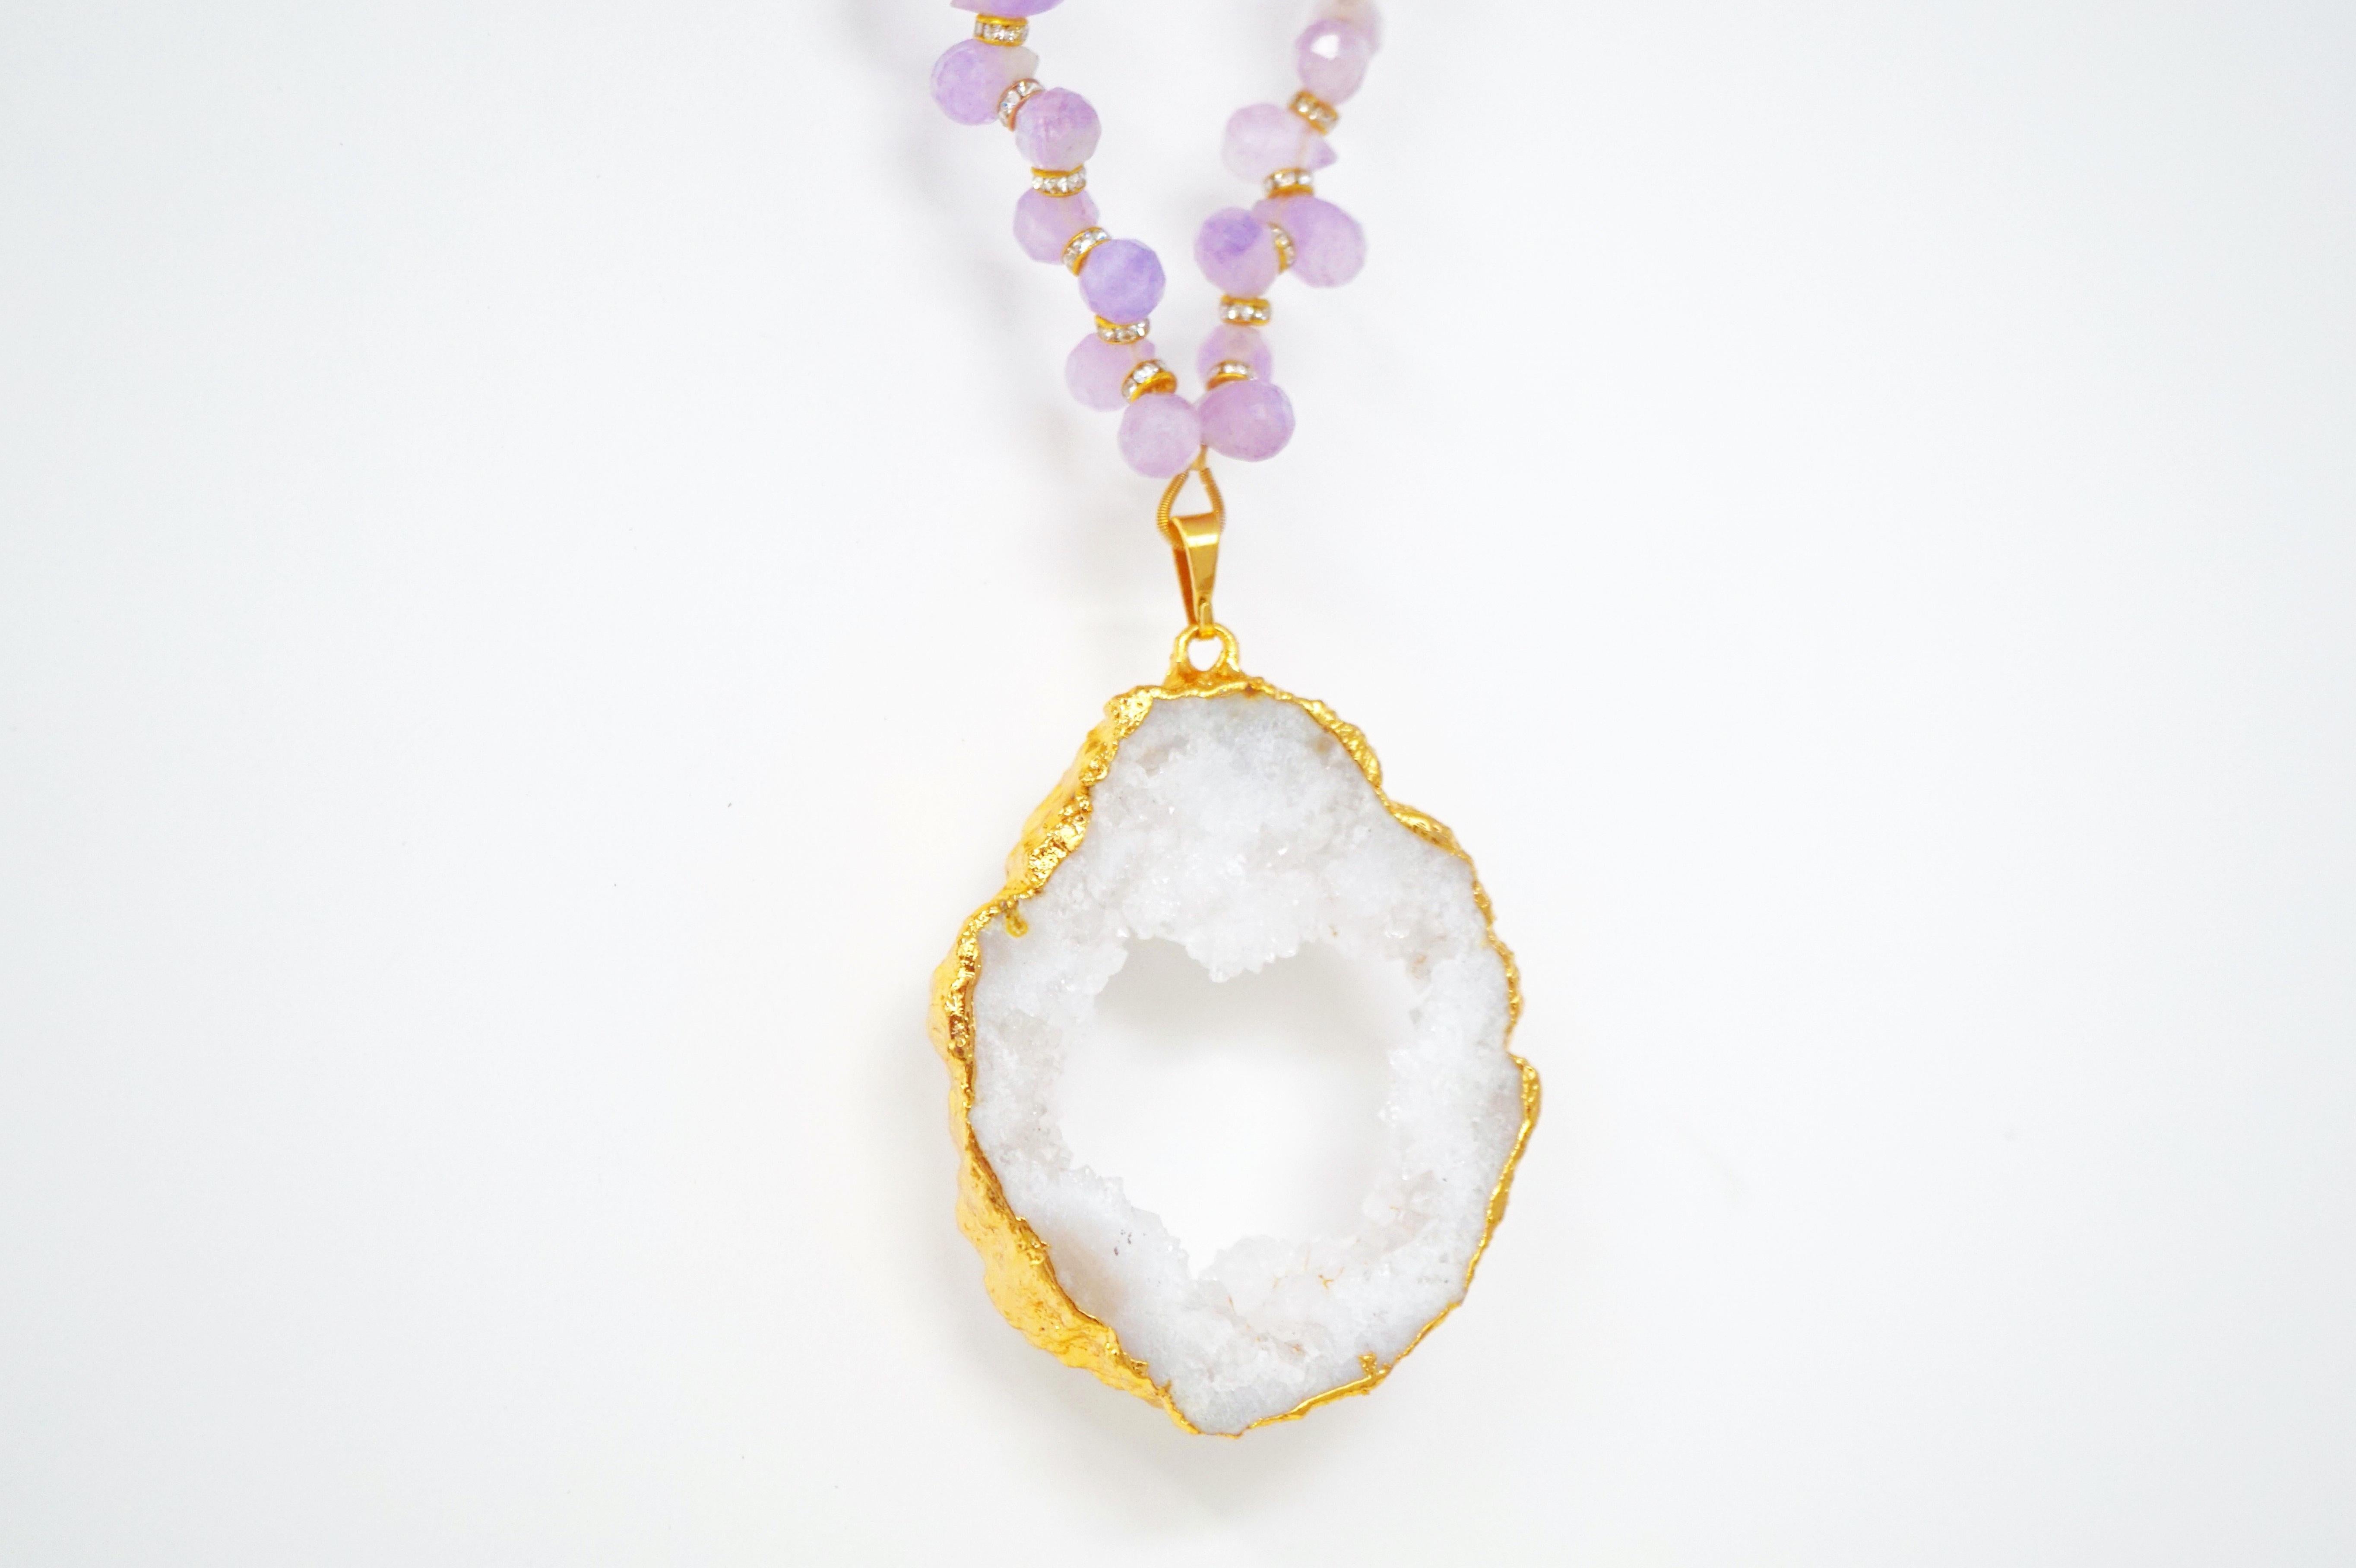 Amethyst Gemstone Necklace with Swarovski Accents and Gilded Druzy Geode Pendant In New Condition For Sale In McKinney, TX